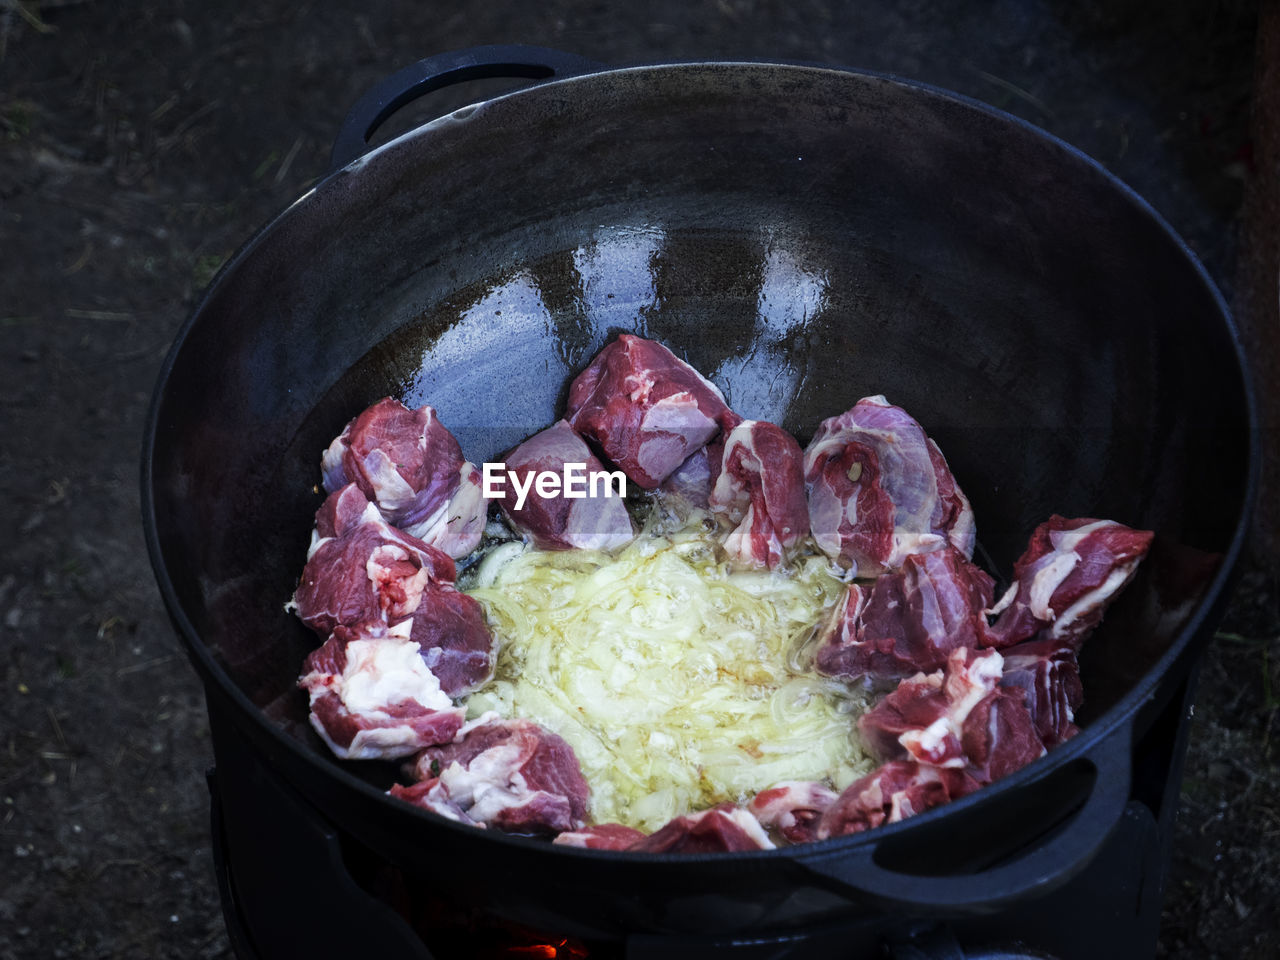 To roasted onions in cauldron are added pieces of lamb, which are roasted to obtain a golden crust. 